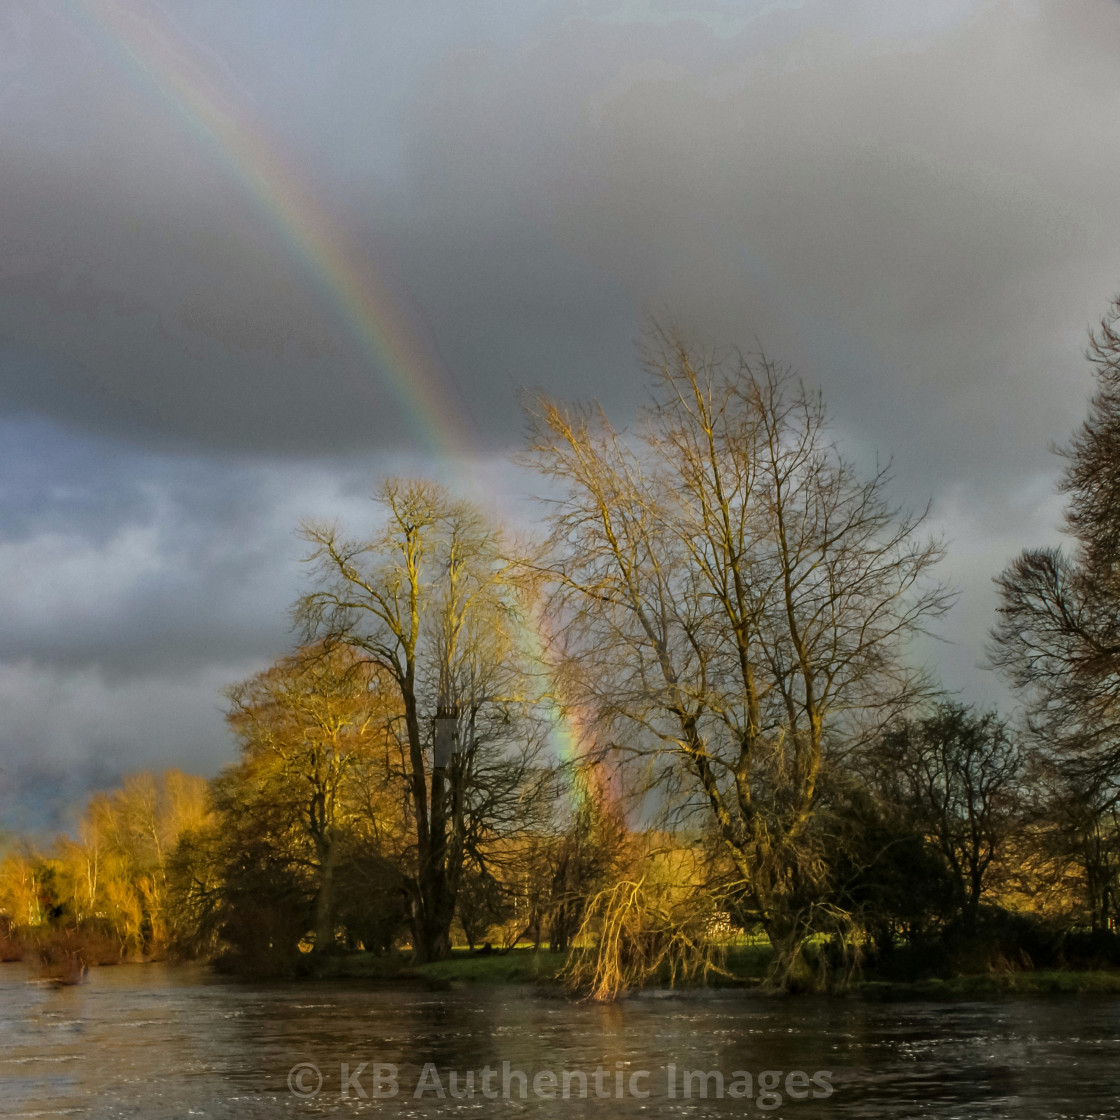 "Rainbow over the Nore" stock image